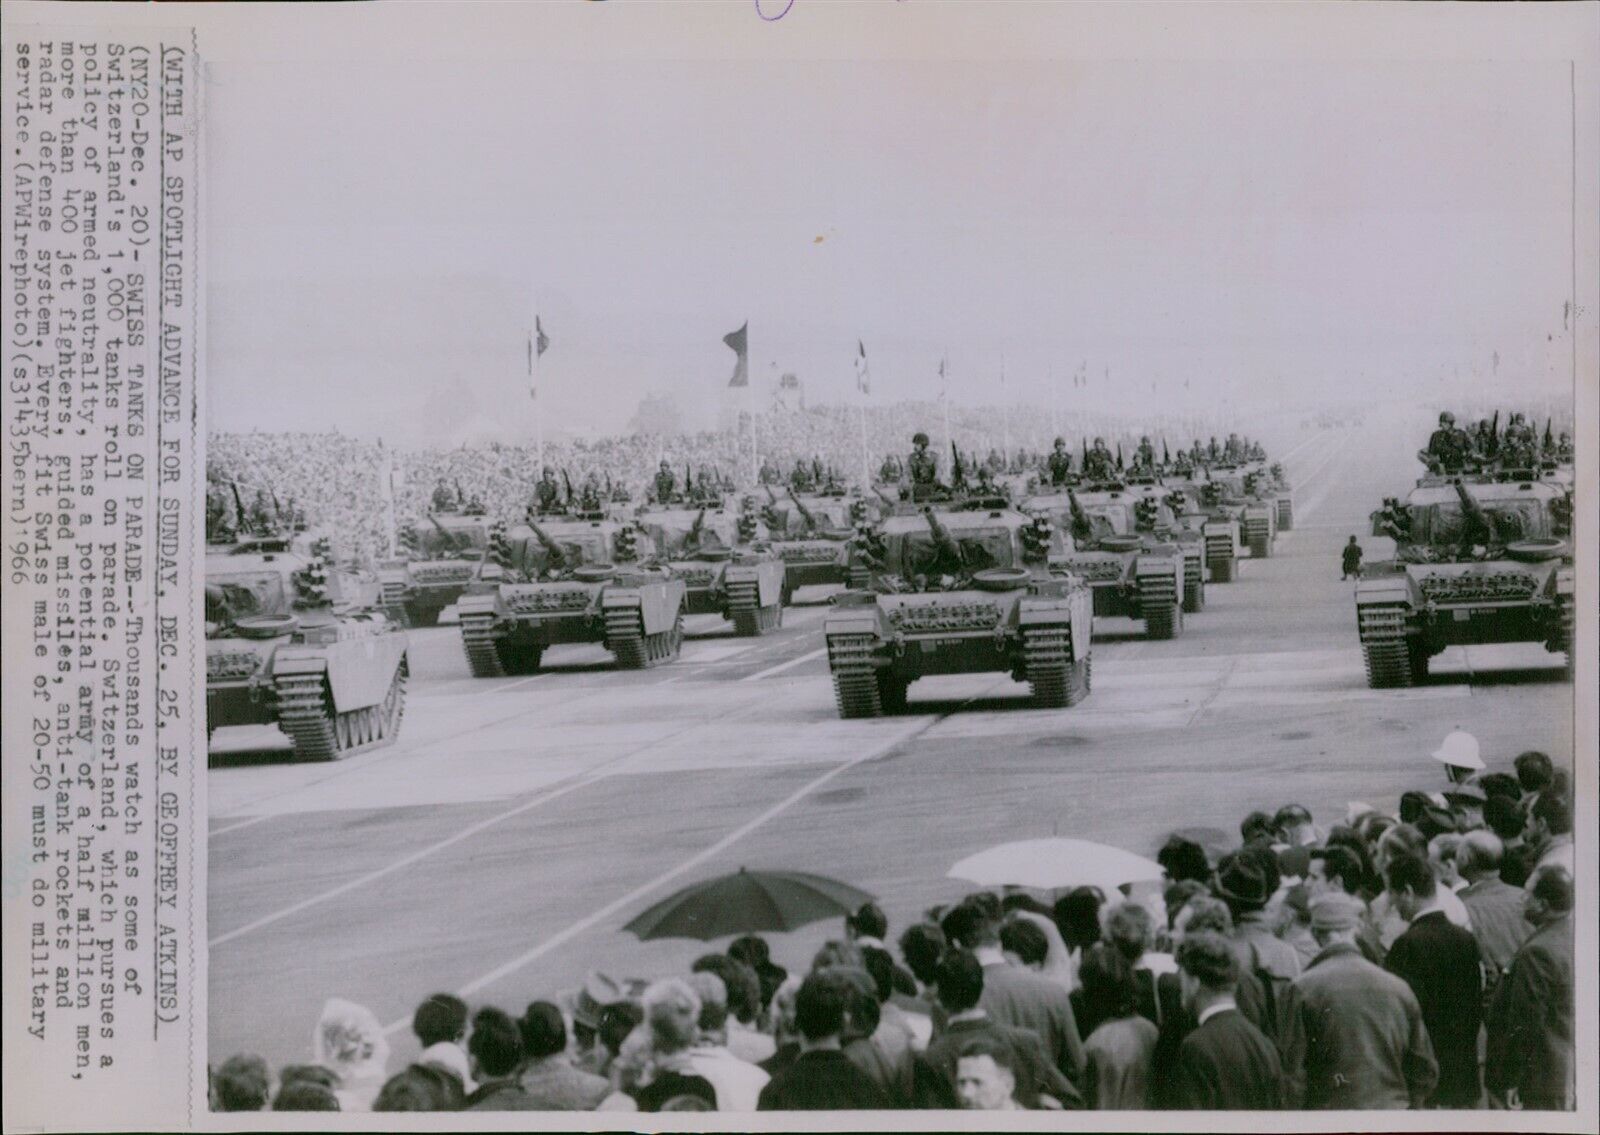 LG773 1966 Wire Photo SWISS ARMY TANKS Military Parade Armed Neutrality Demo